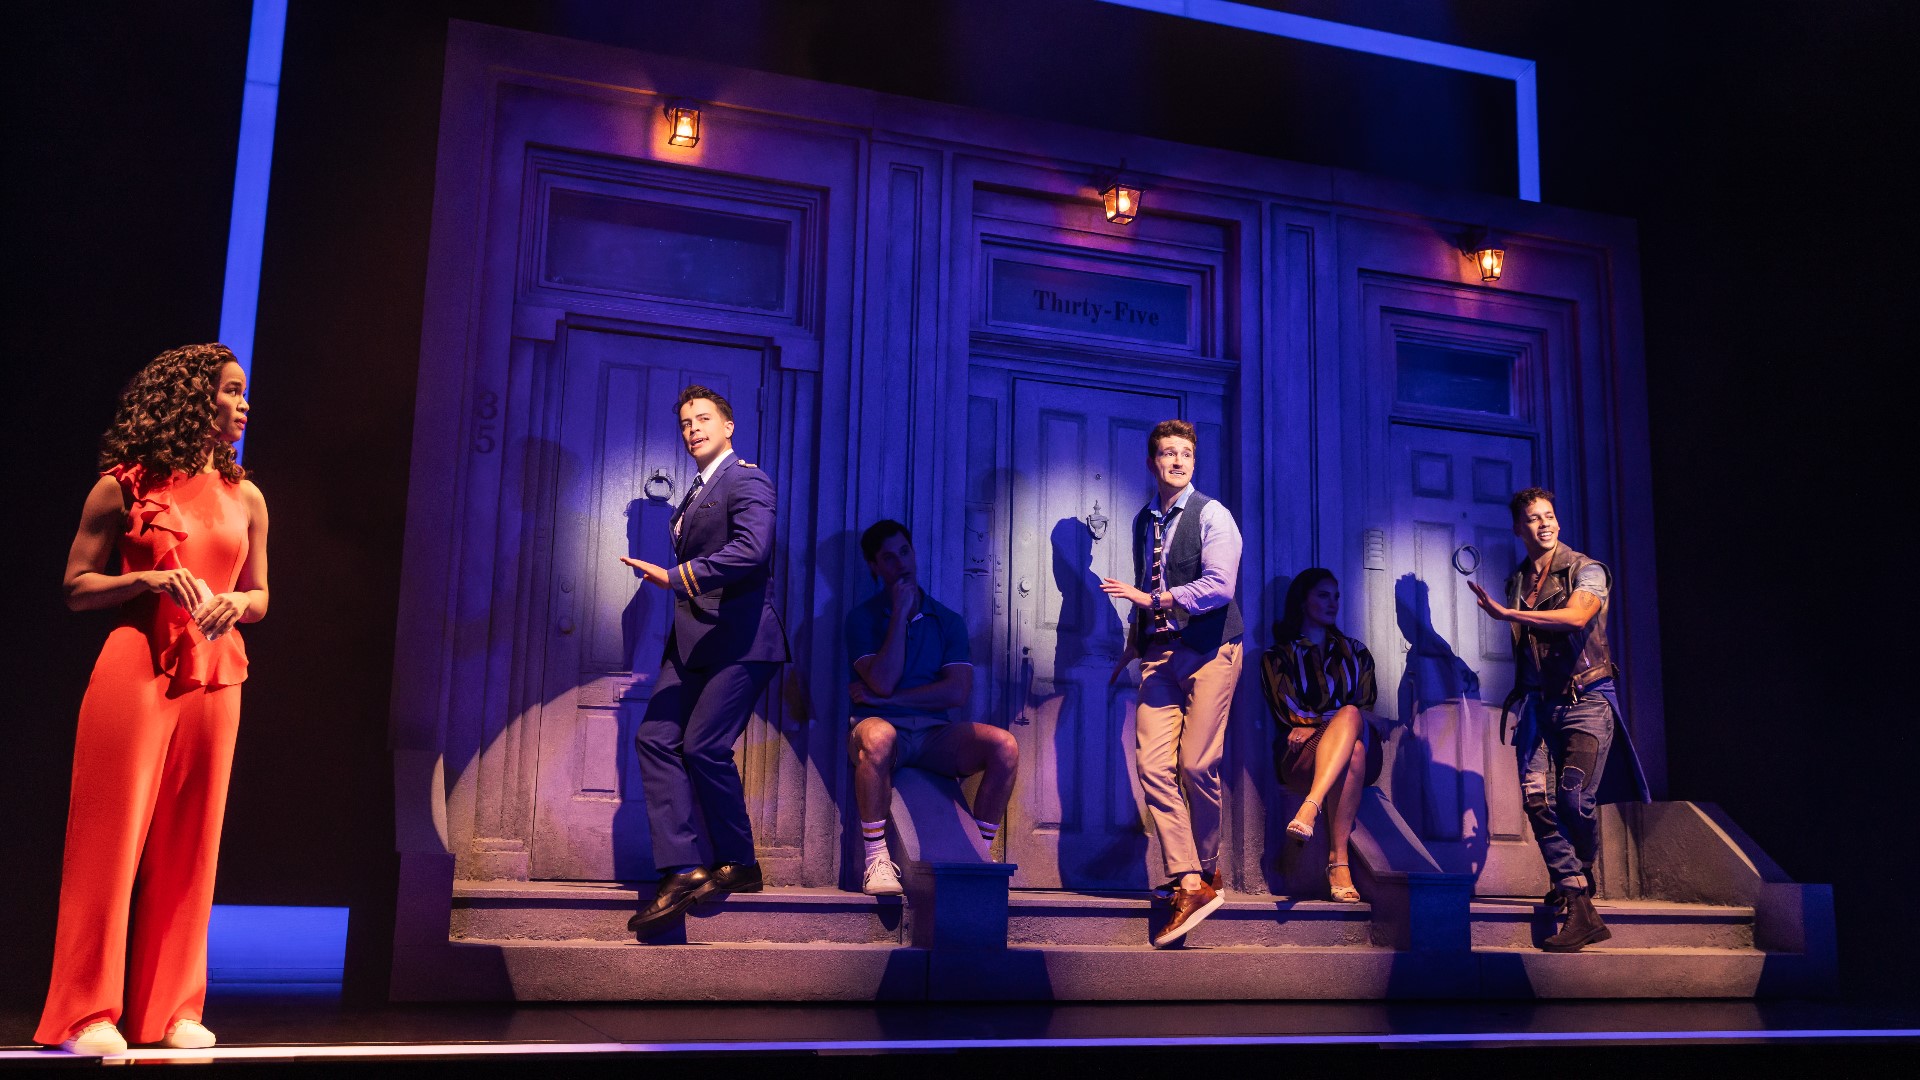 Jacob Dickey, Tyler Hardwick, and David Socolar star in the Tony award-winning musical 'Company' that's now playing at the Kennedy Center from March 12th to 31st.